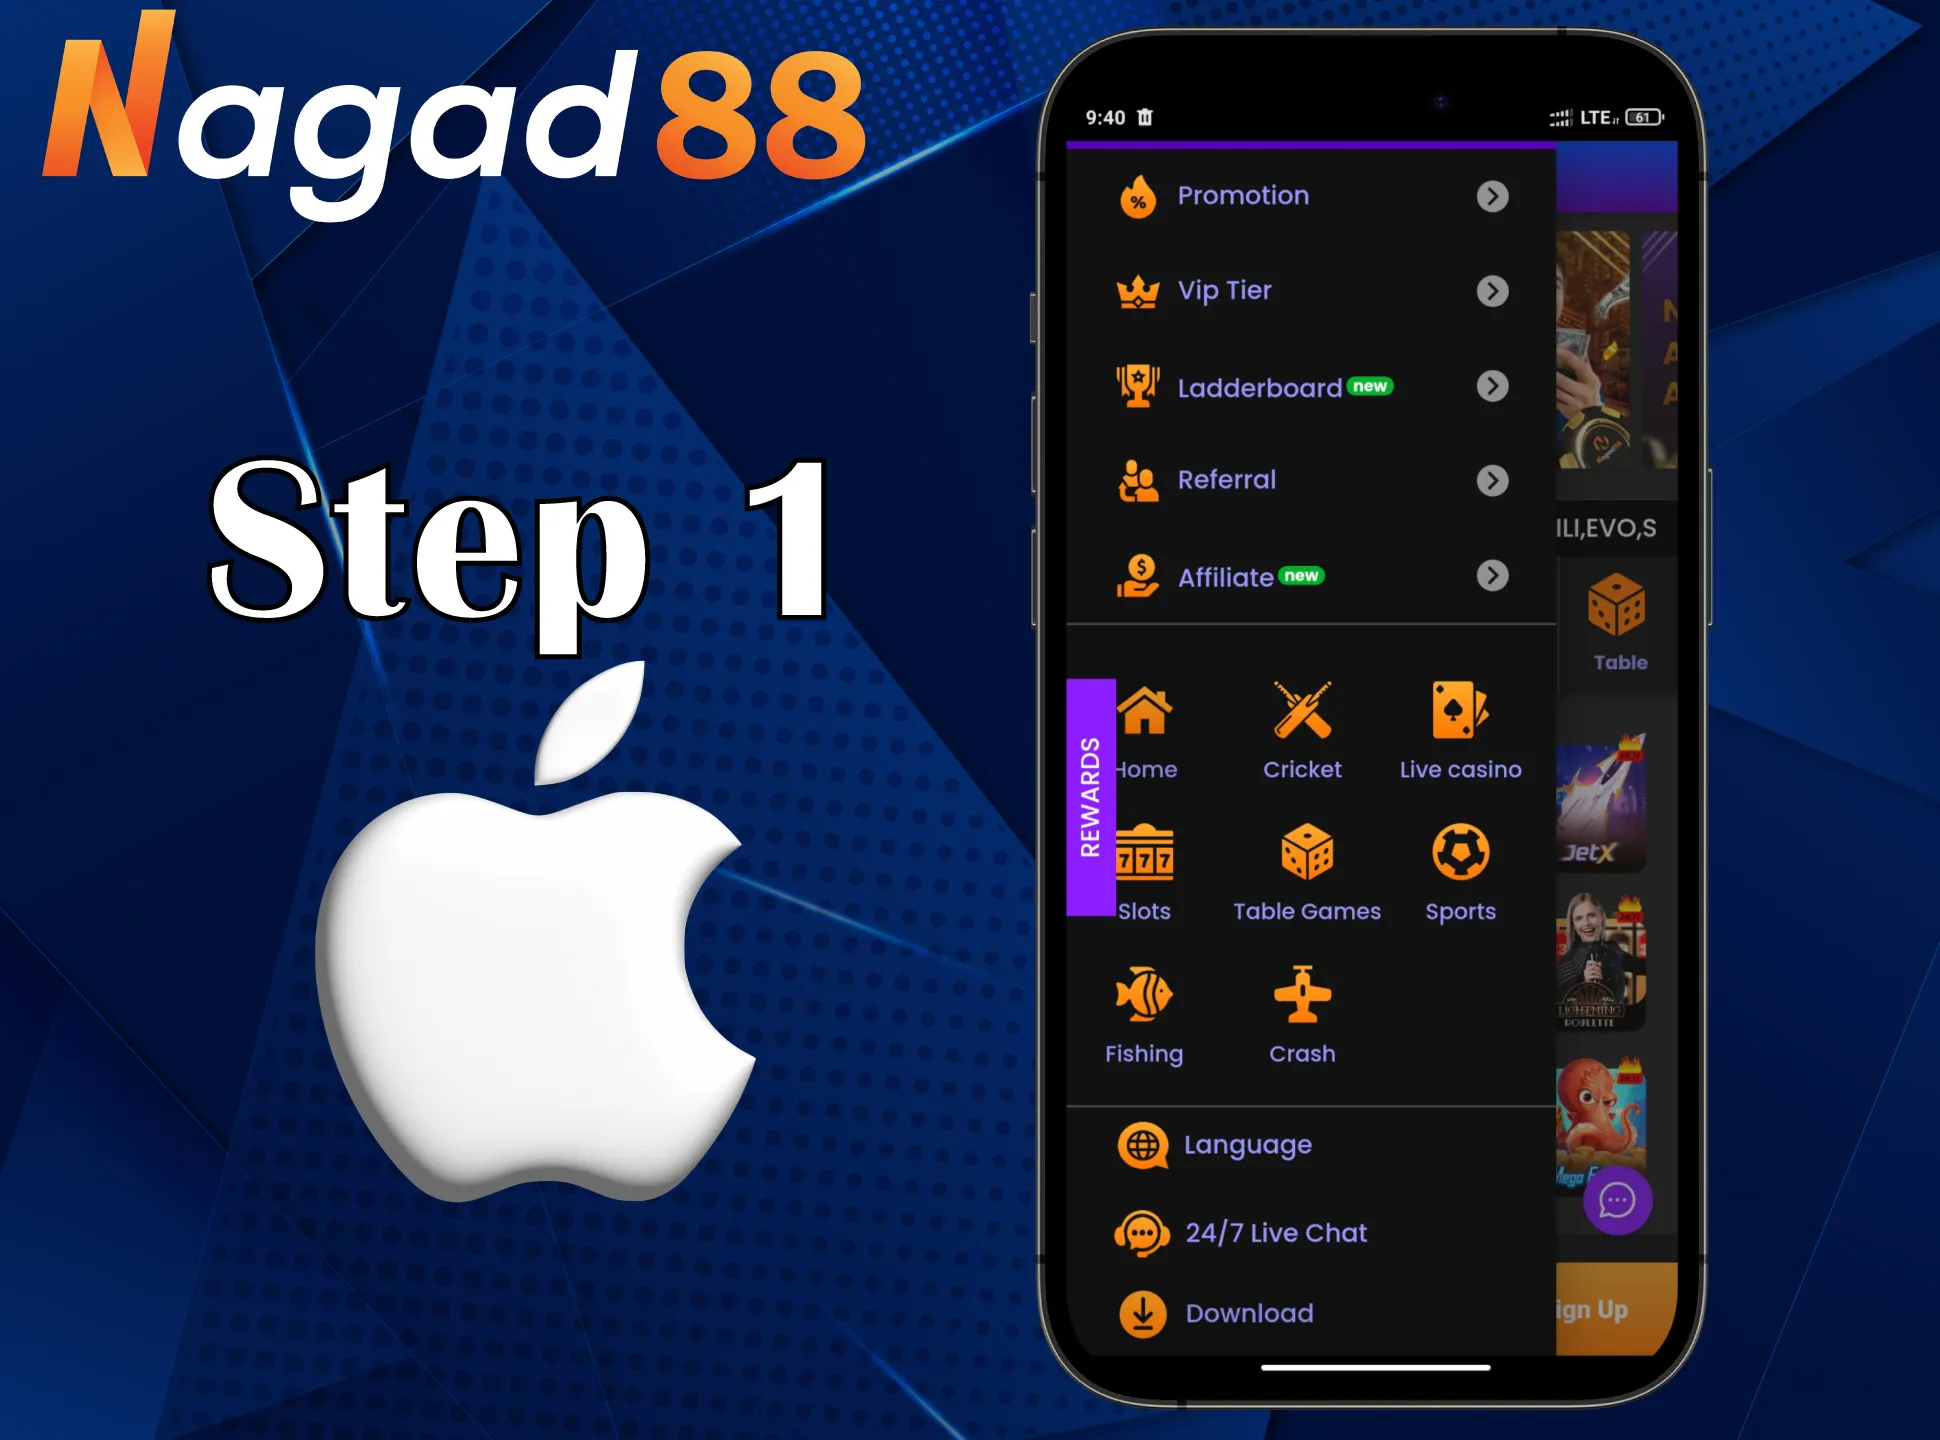 Go to the official website of the Nagad88.